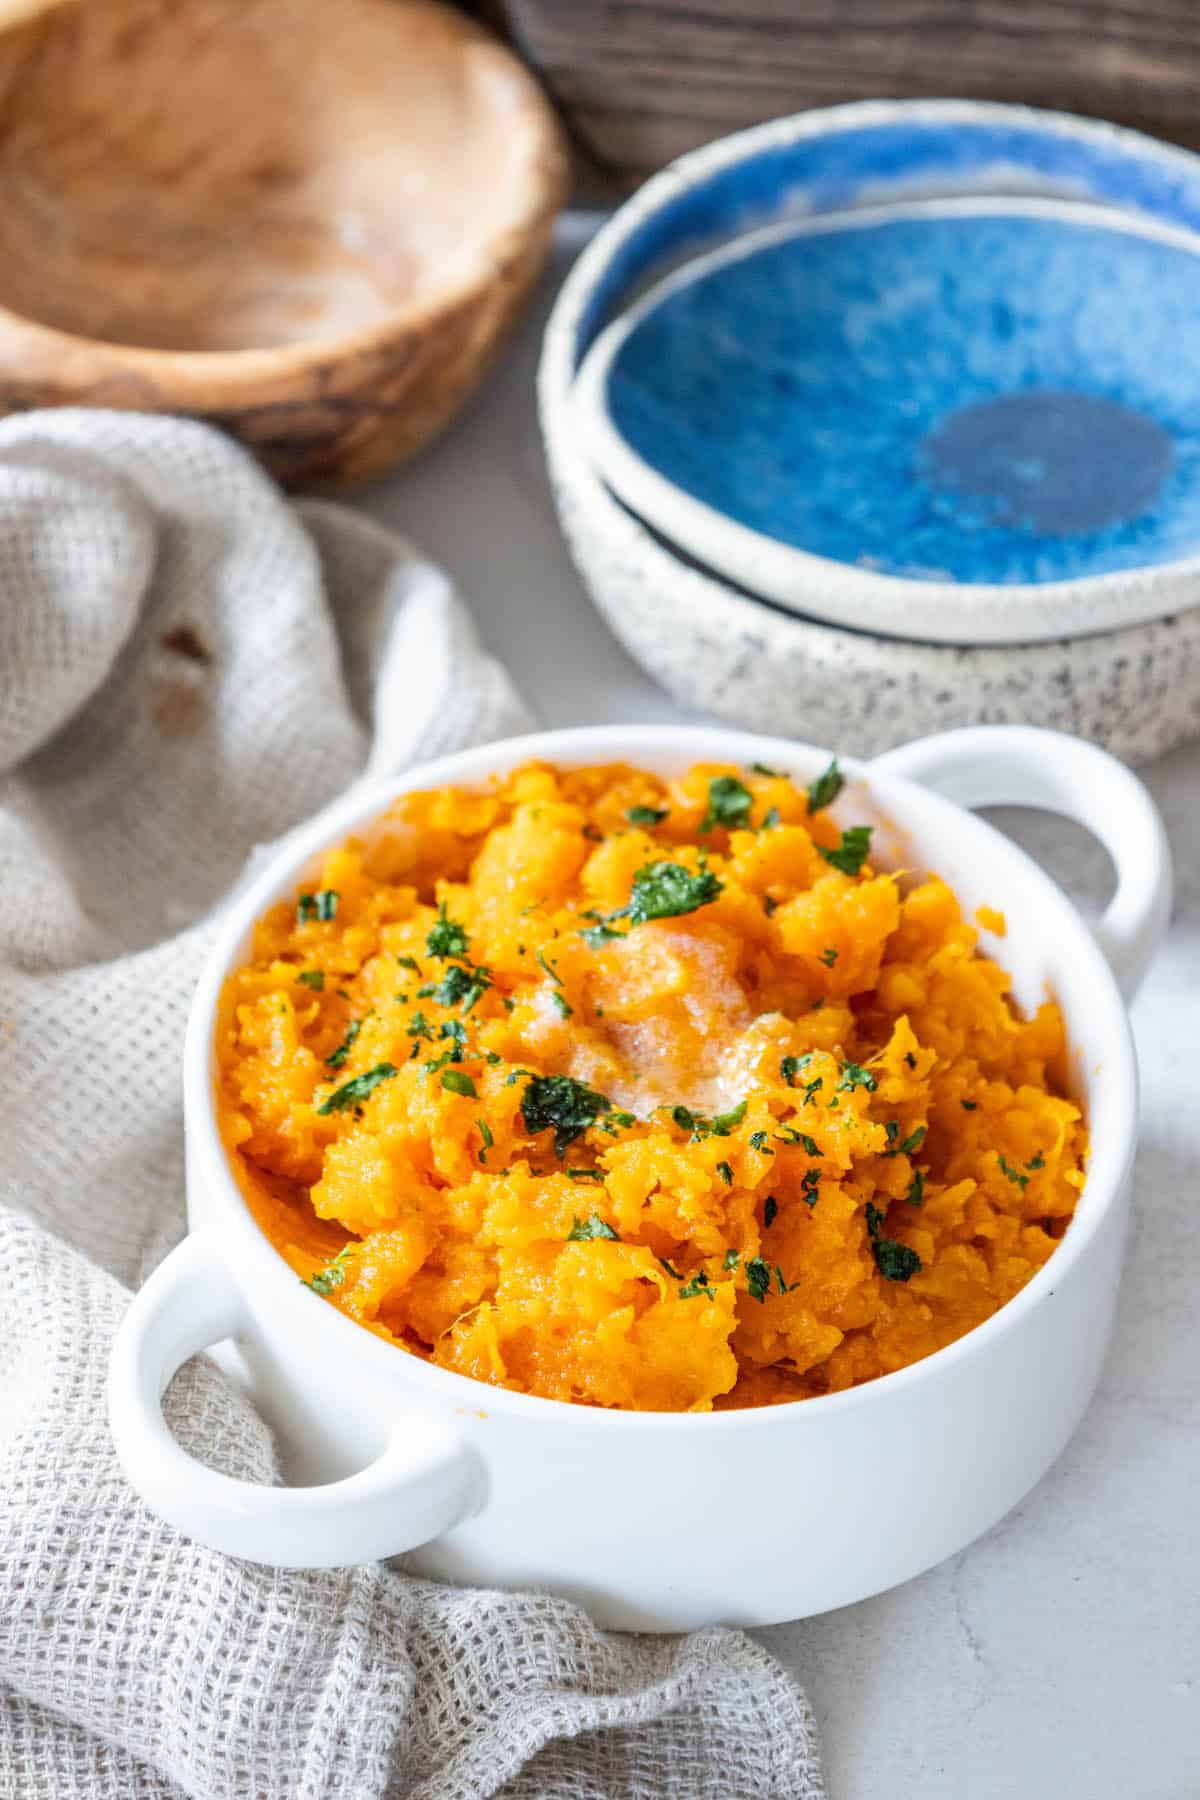 A bowl of mashed sweet potatoes on a table.